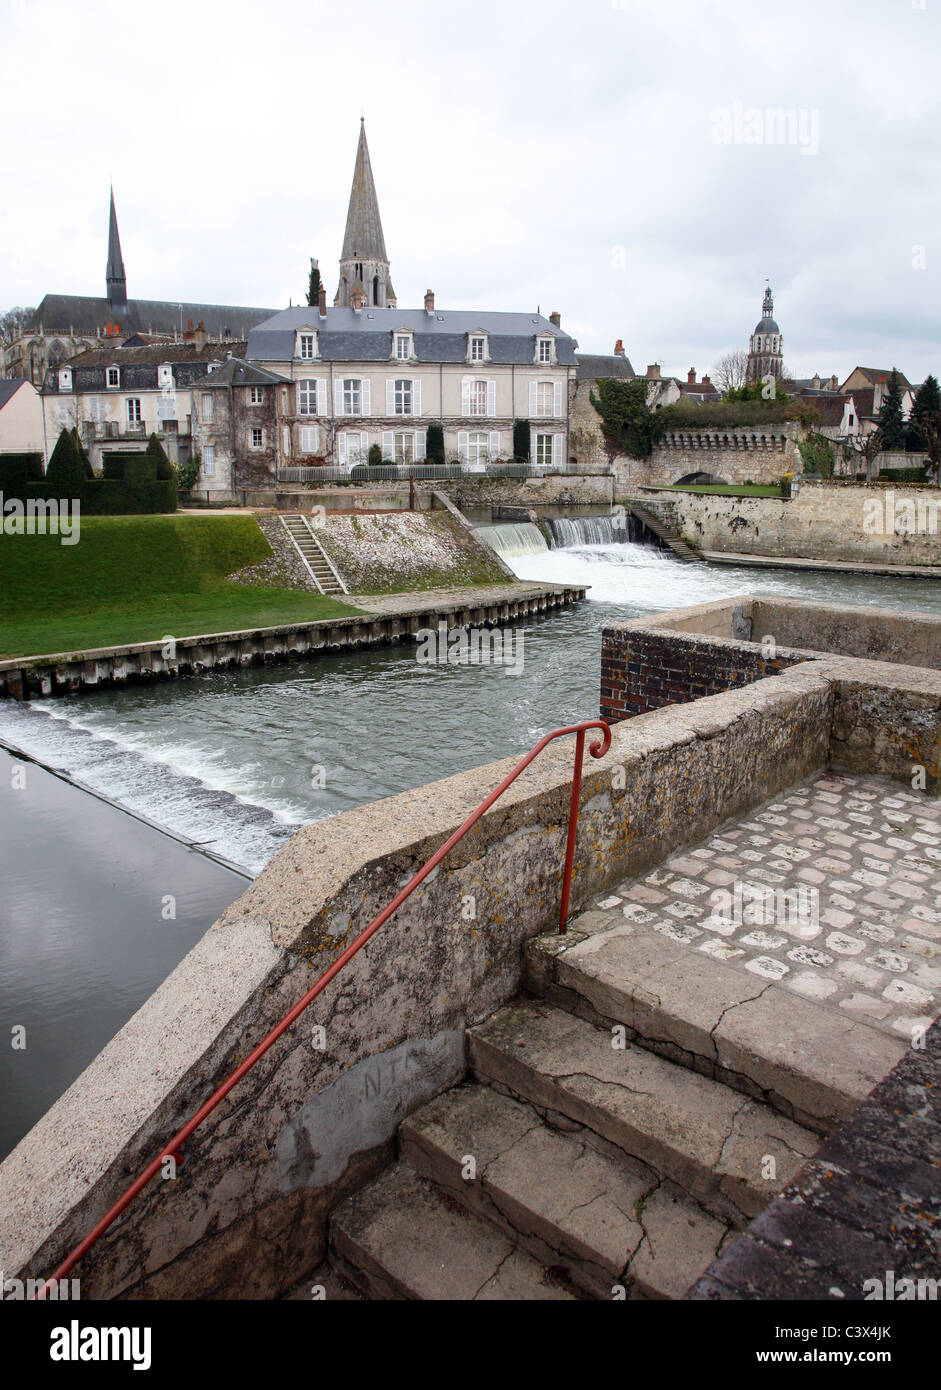 View over the old town of Vendome showing the elaborate river control system Stock Photo